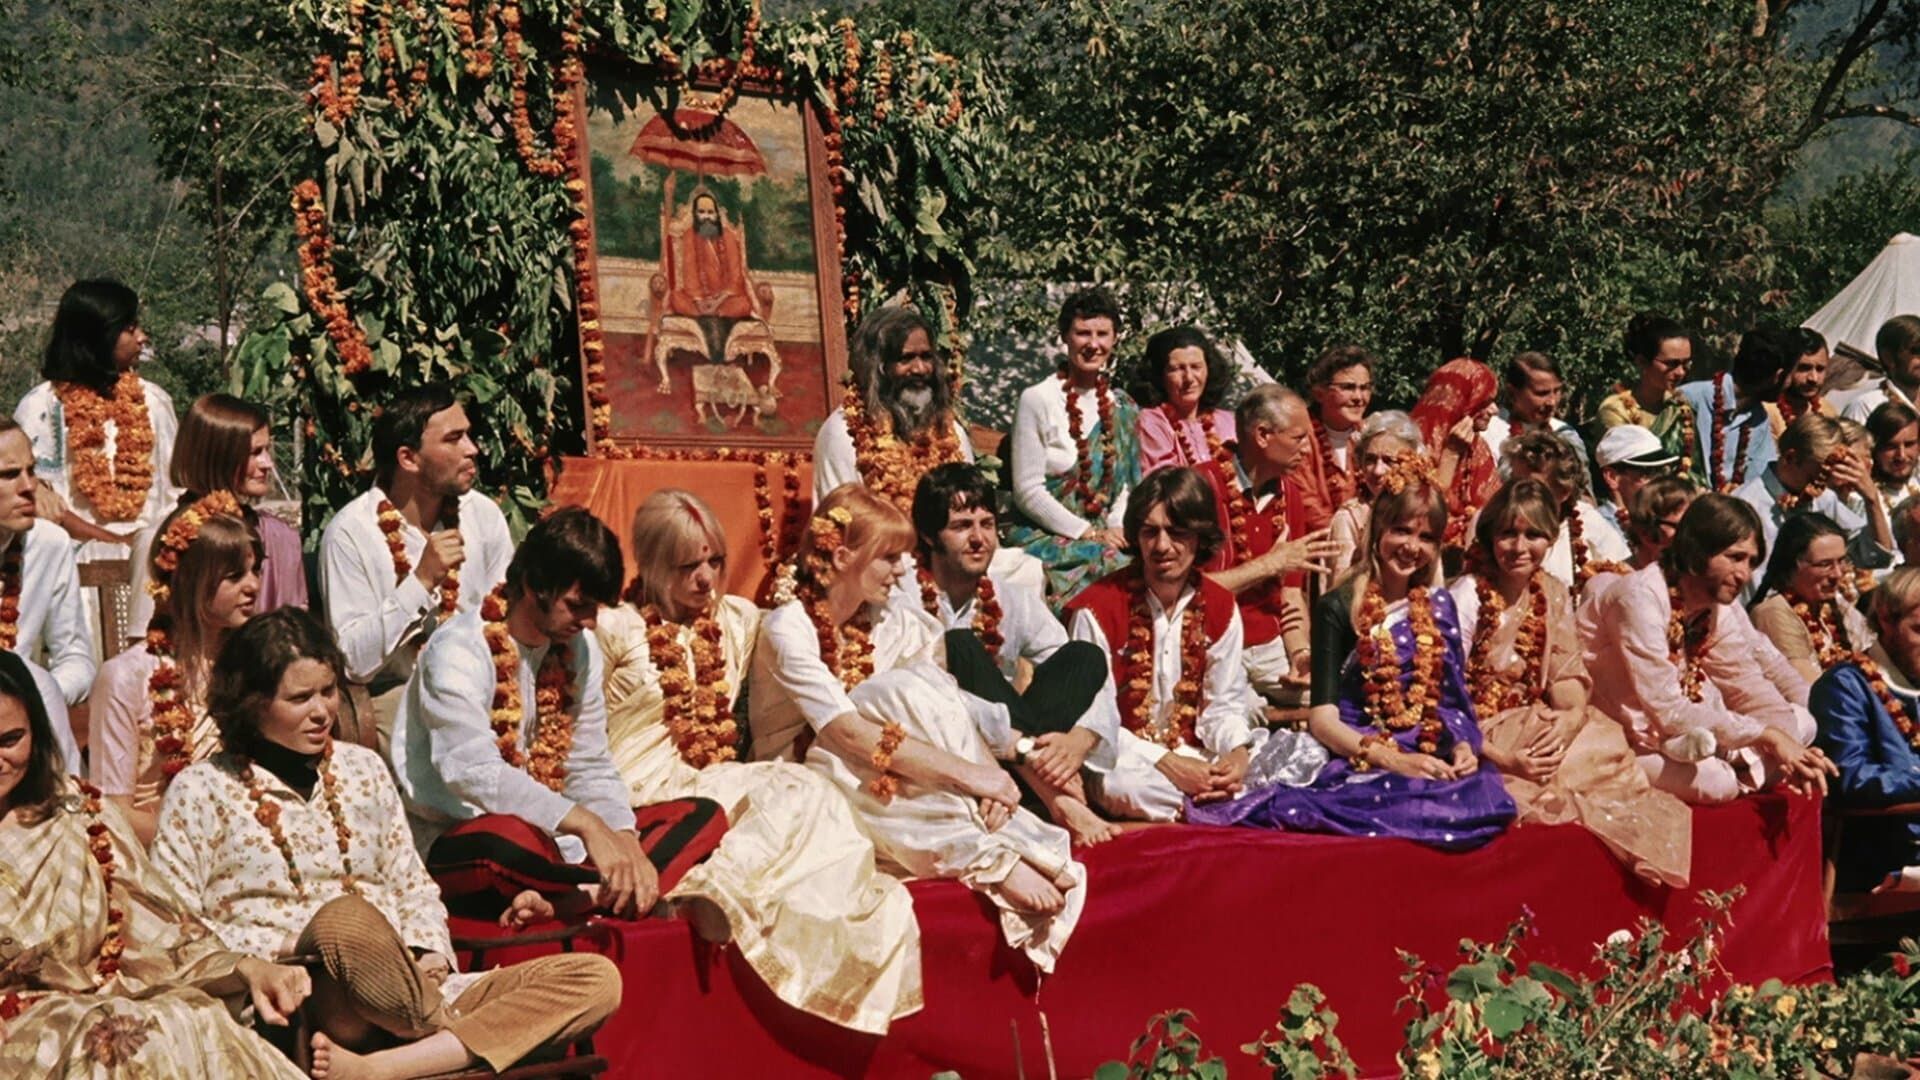 The Beatles and India background